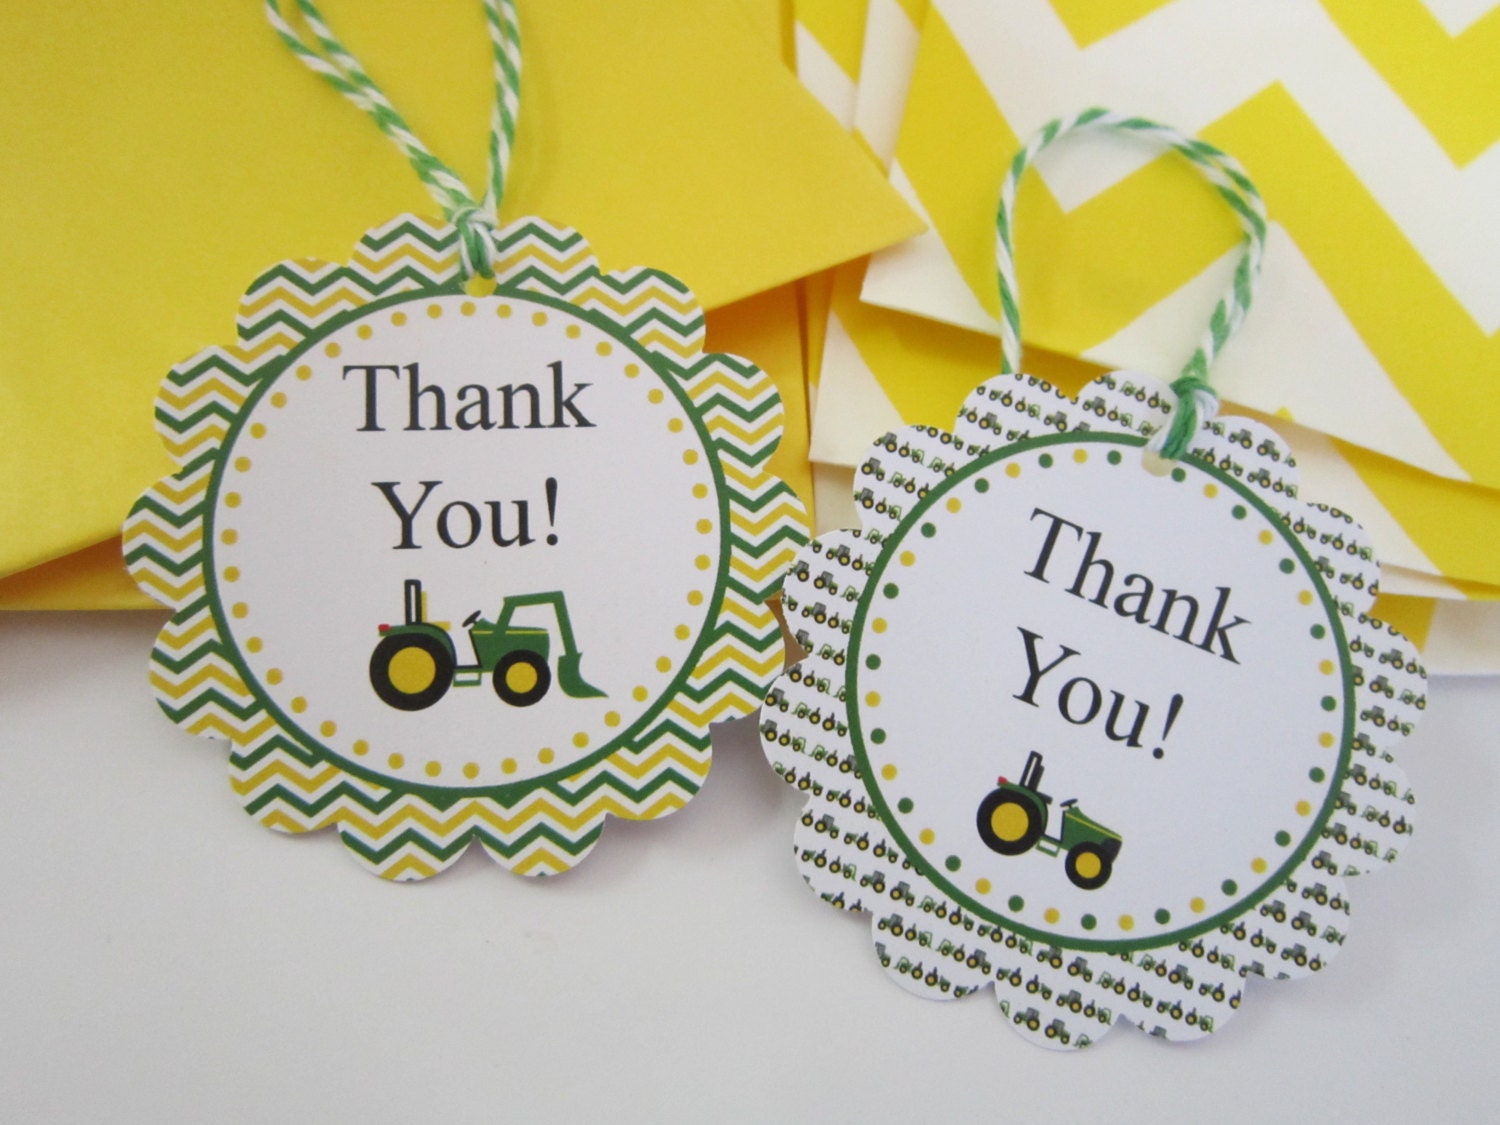 12-john-deere-tractor-thank-you-tags-or-personalized-john-deere-tags-by